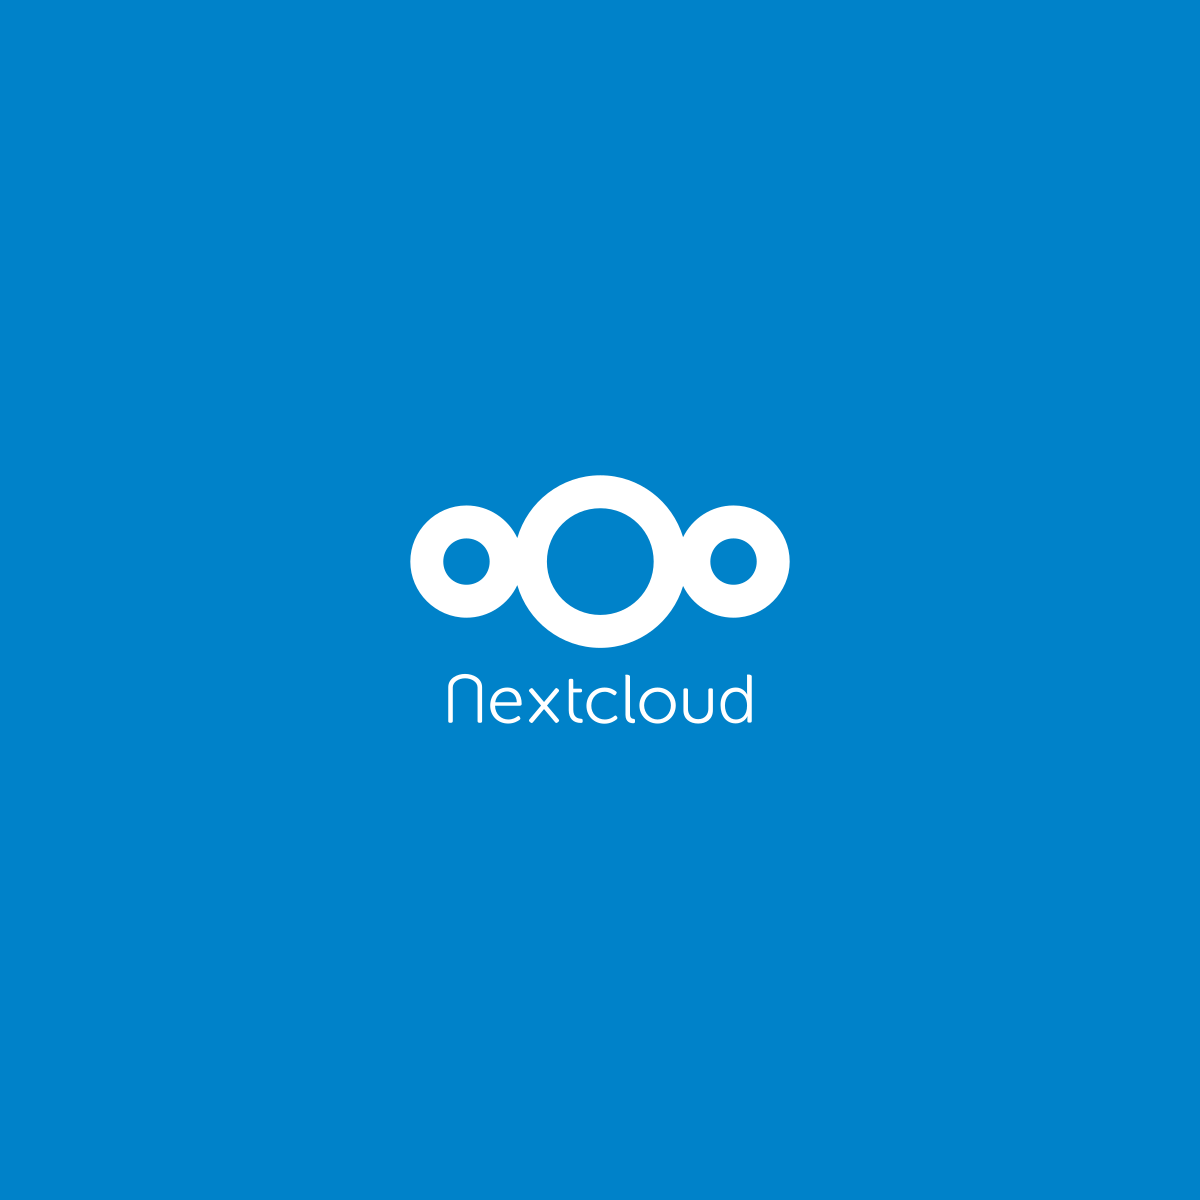 nextcloud - self-hosted cloud alternative with privacy and security